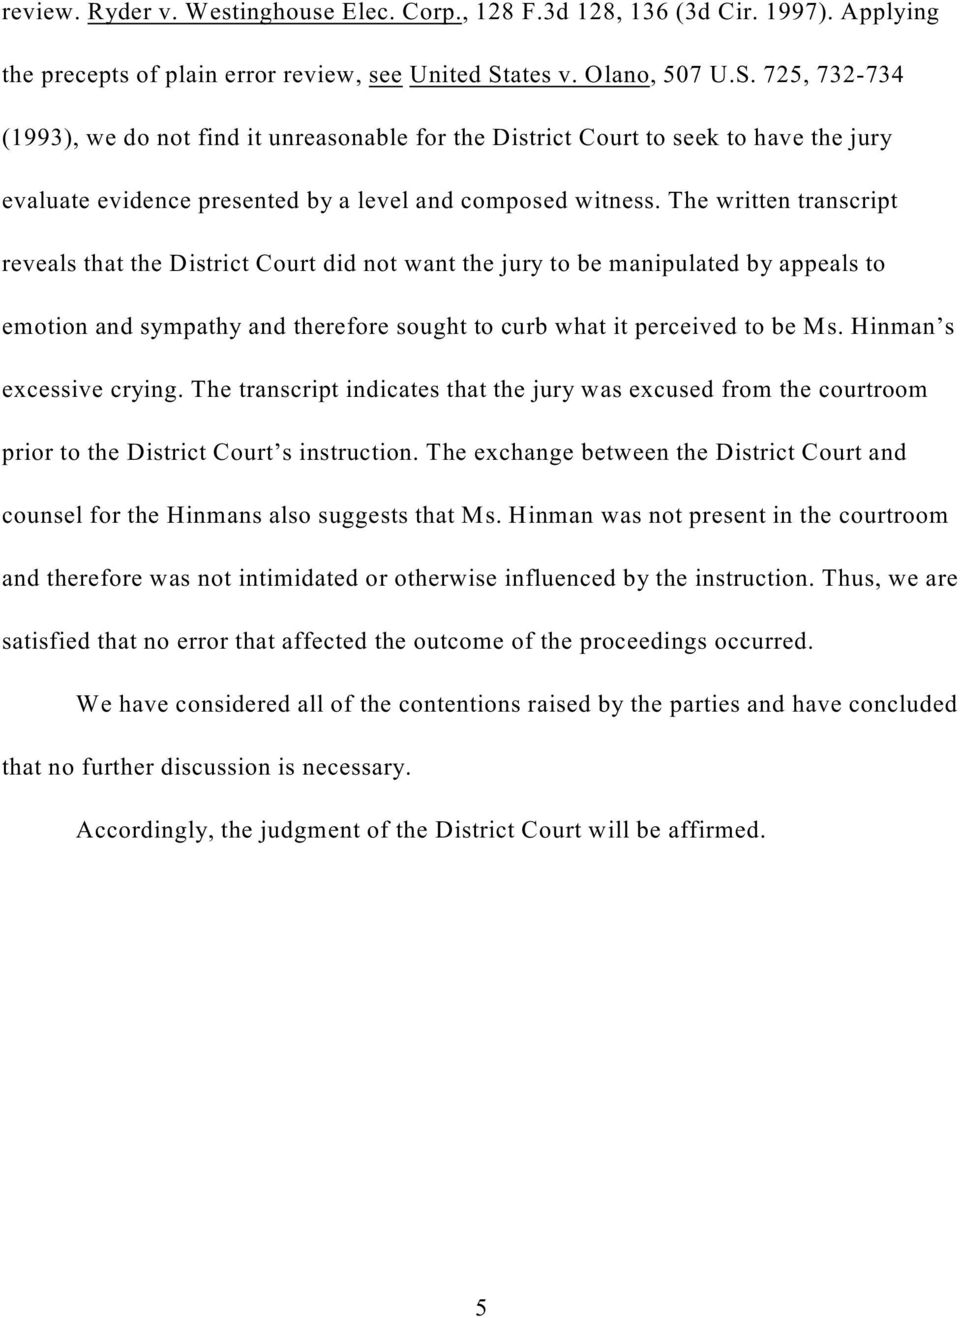 The written transcript reveals that the District Court did not want the jury to be manipulated by appeals to emotion and sympathy and therefore sought to curb what it perceived to be Ms.